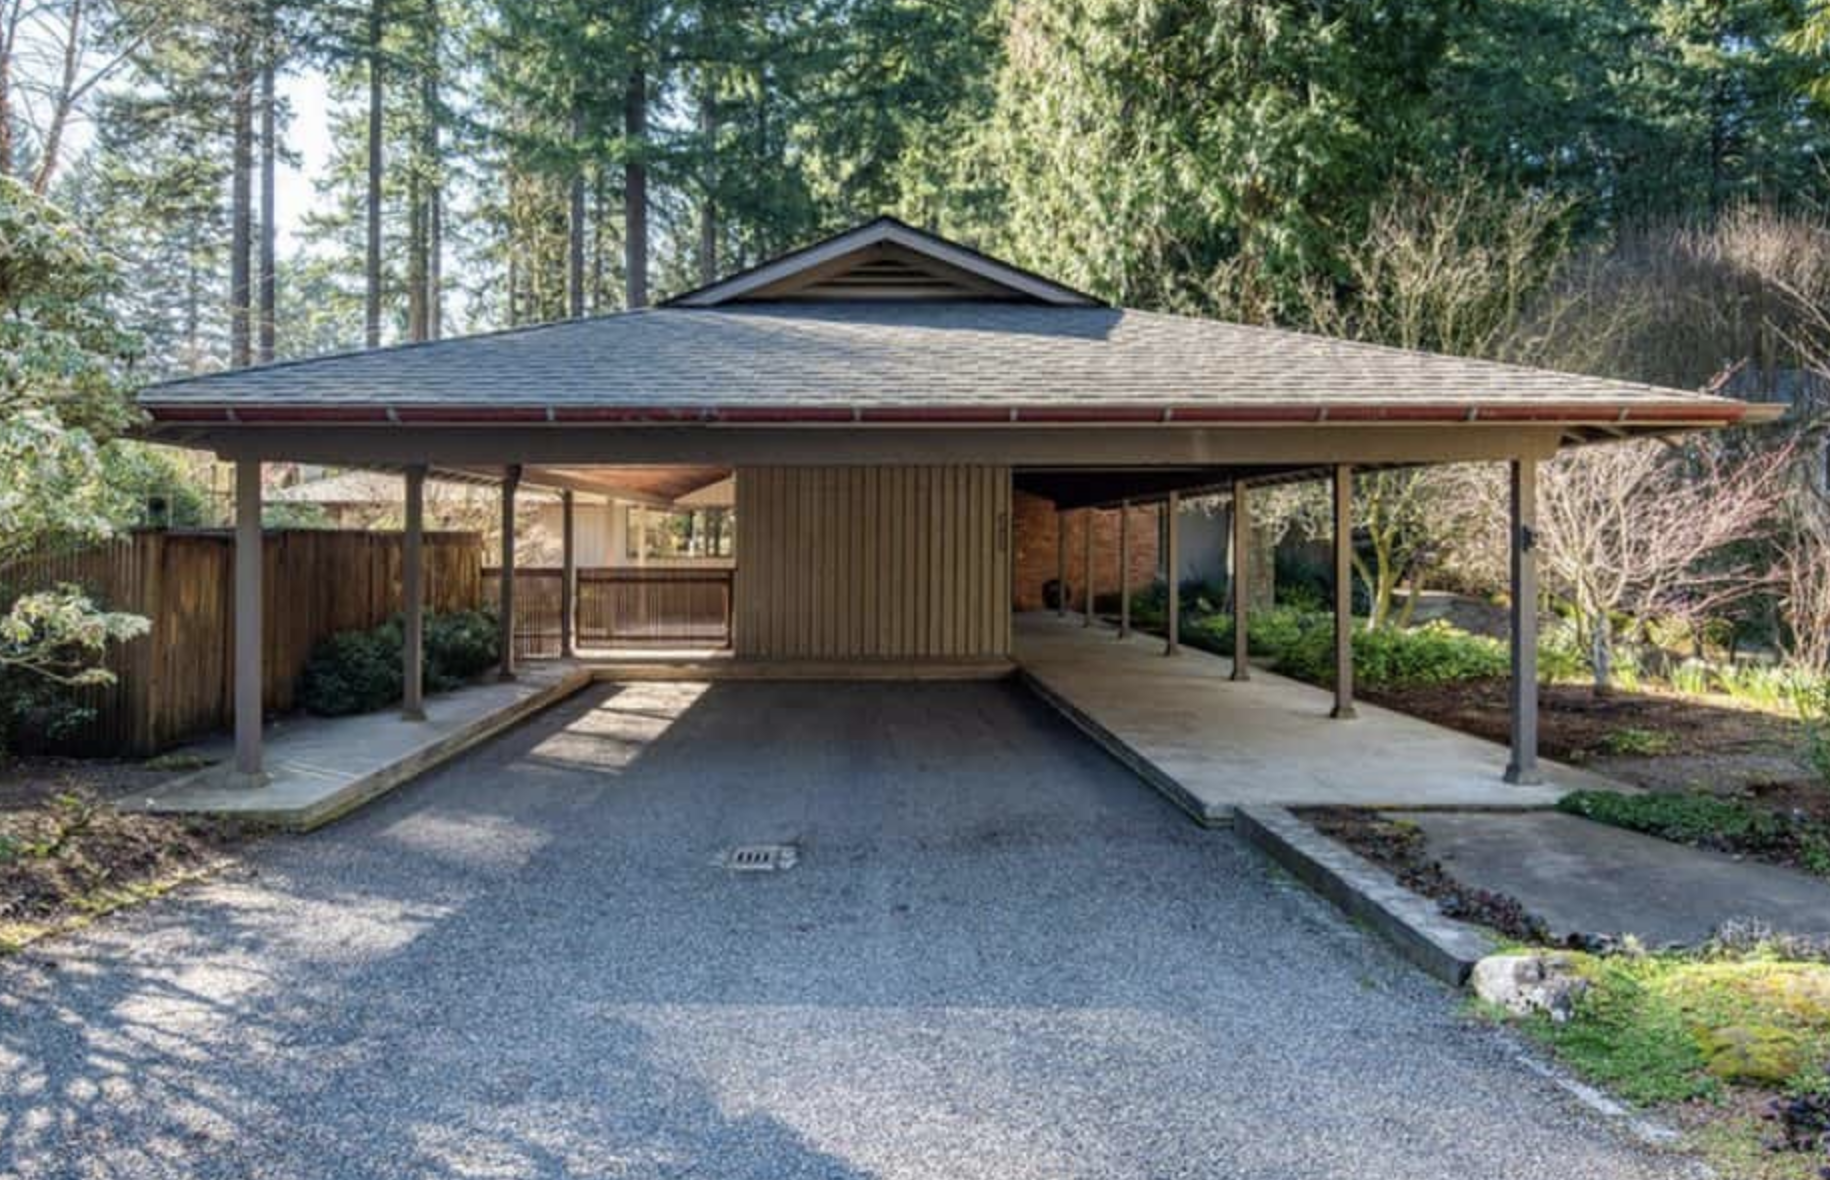 How to Tour Iconic Midcentury Homes in 2020